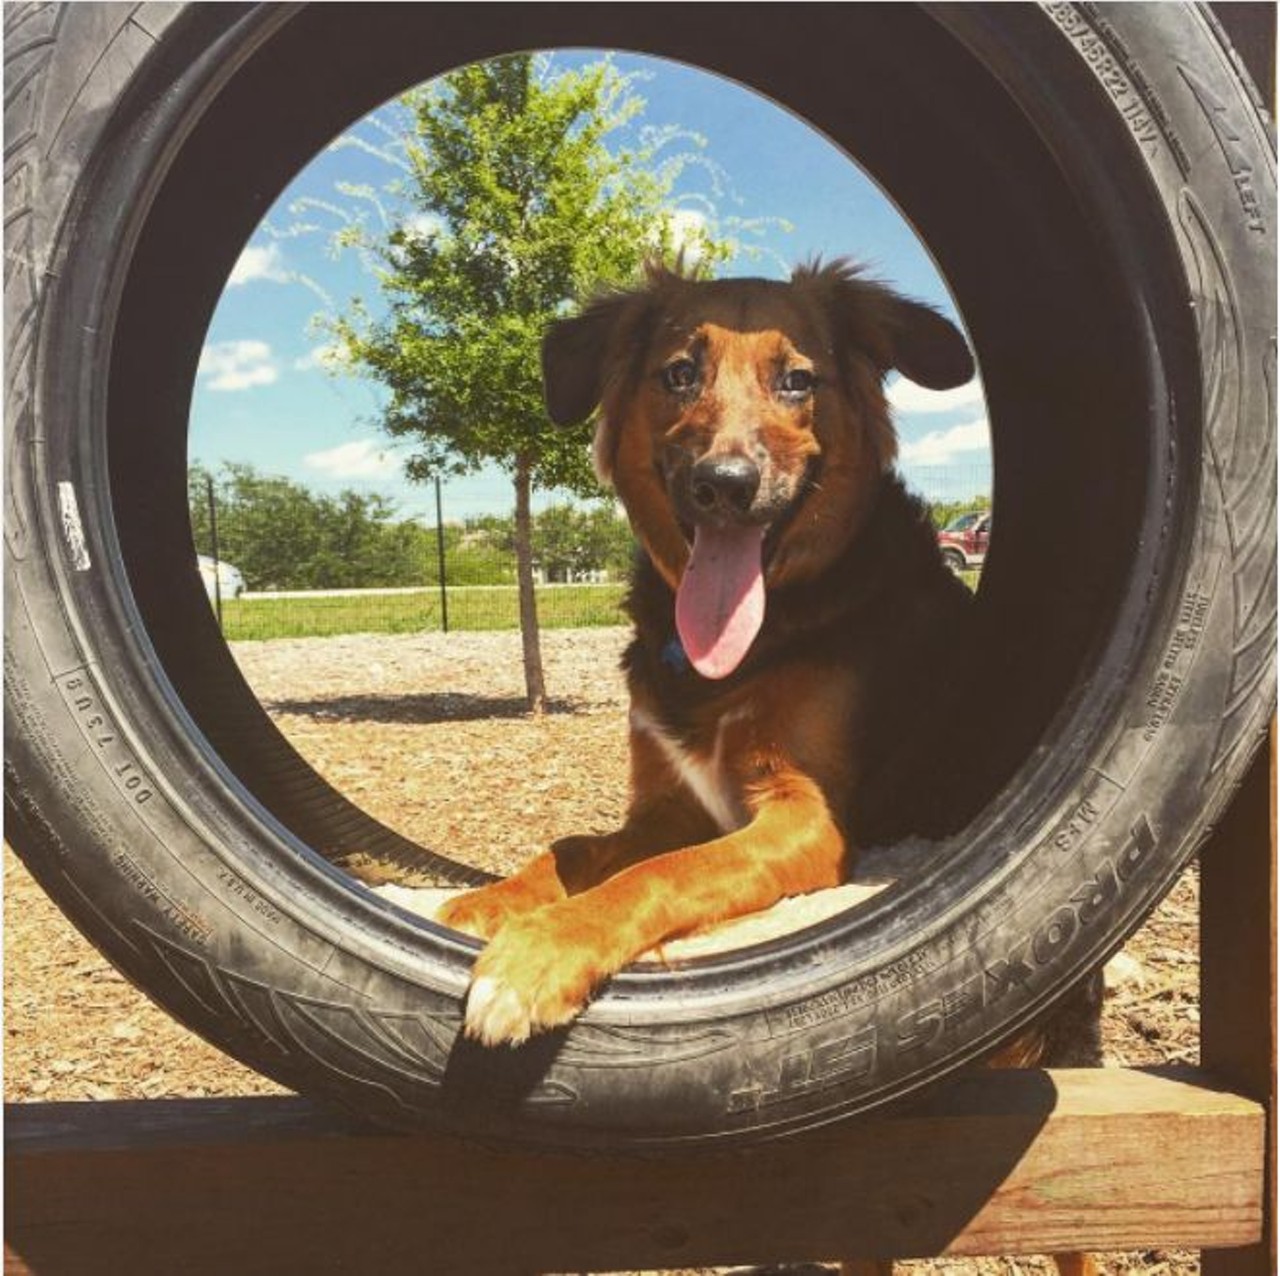 Panther Springs Park
22635 Wilderness Oak
This doggy hangout on the far Northside has a combined area for big and small dogs &#150; so make sure your pooch is cool hanging with differently-sized pals.
Photo via Instagram, daniellegrace2016